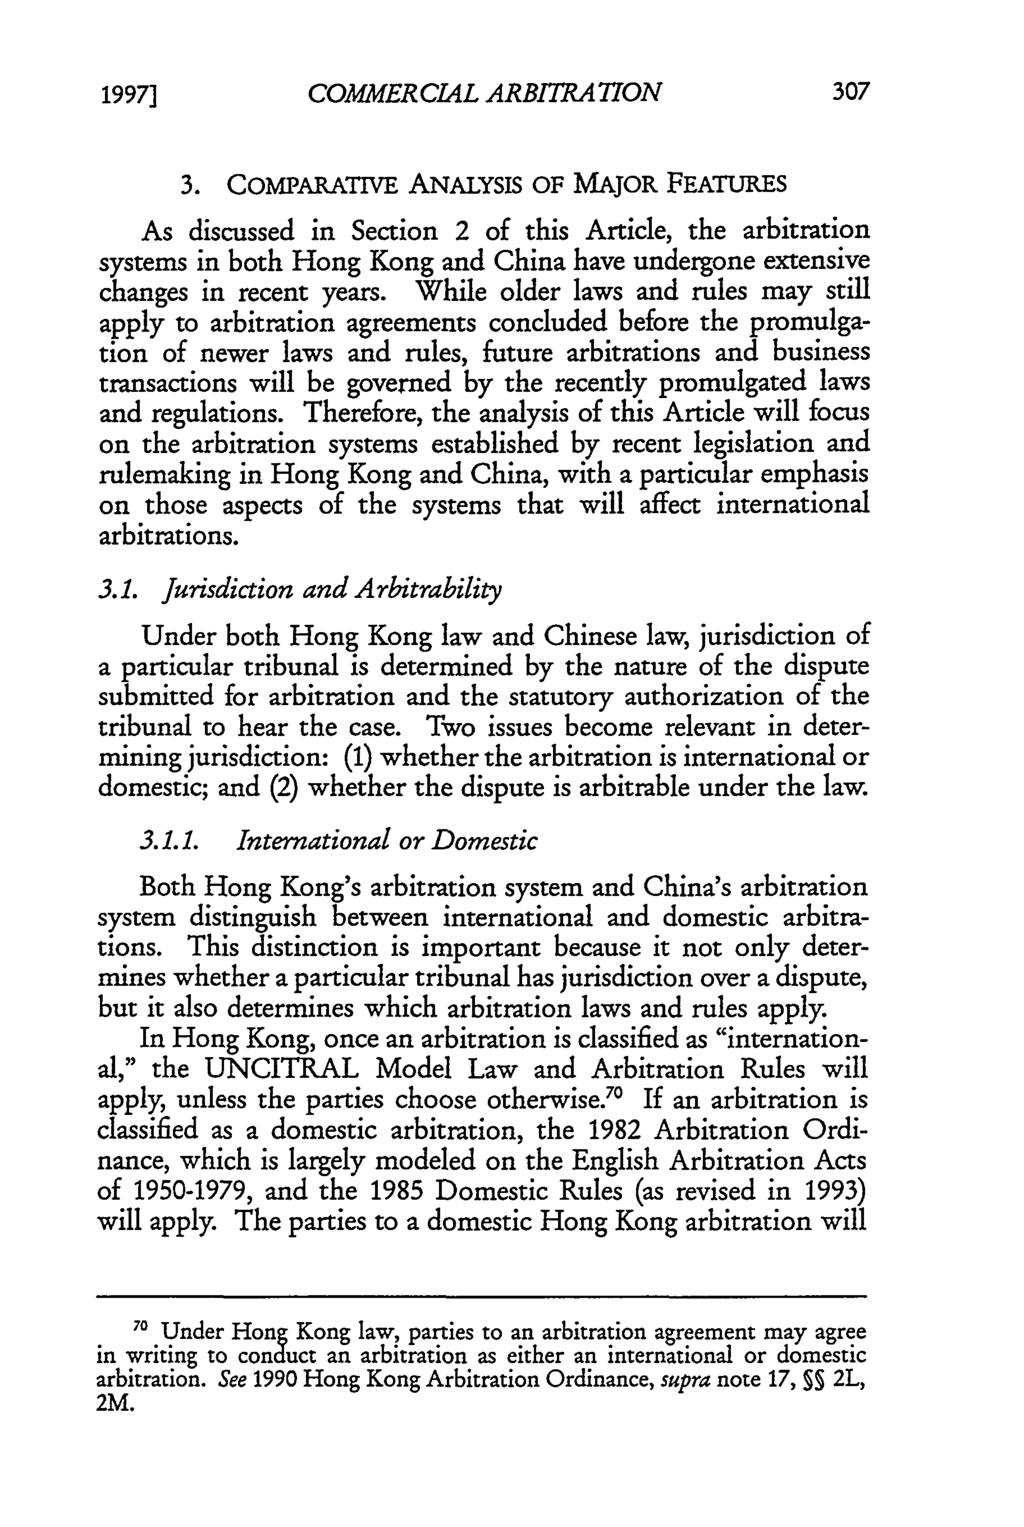 19971 Fishburne and Lian: Commercial Arbitration in Hong Kong and China: A Comparative Anal COMMER CIL ARBITRATION 3.